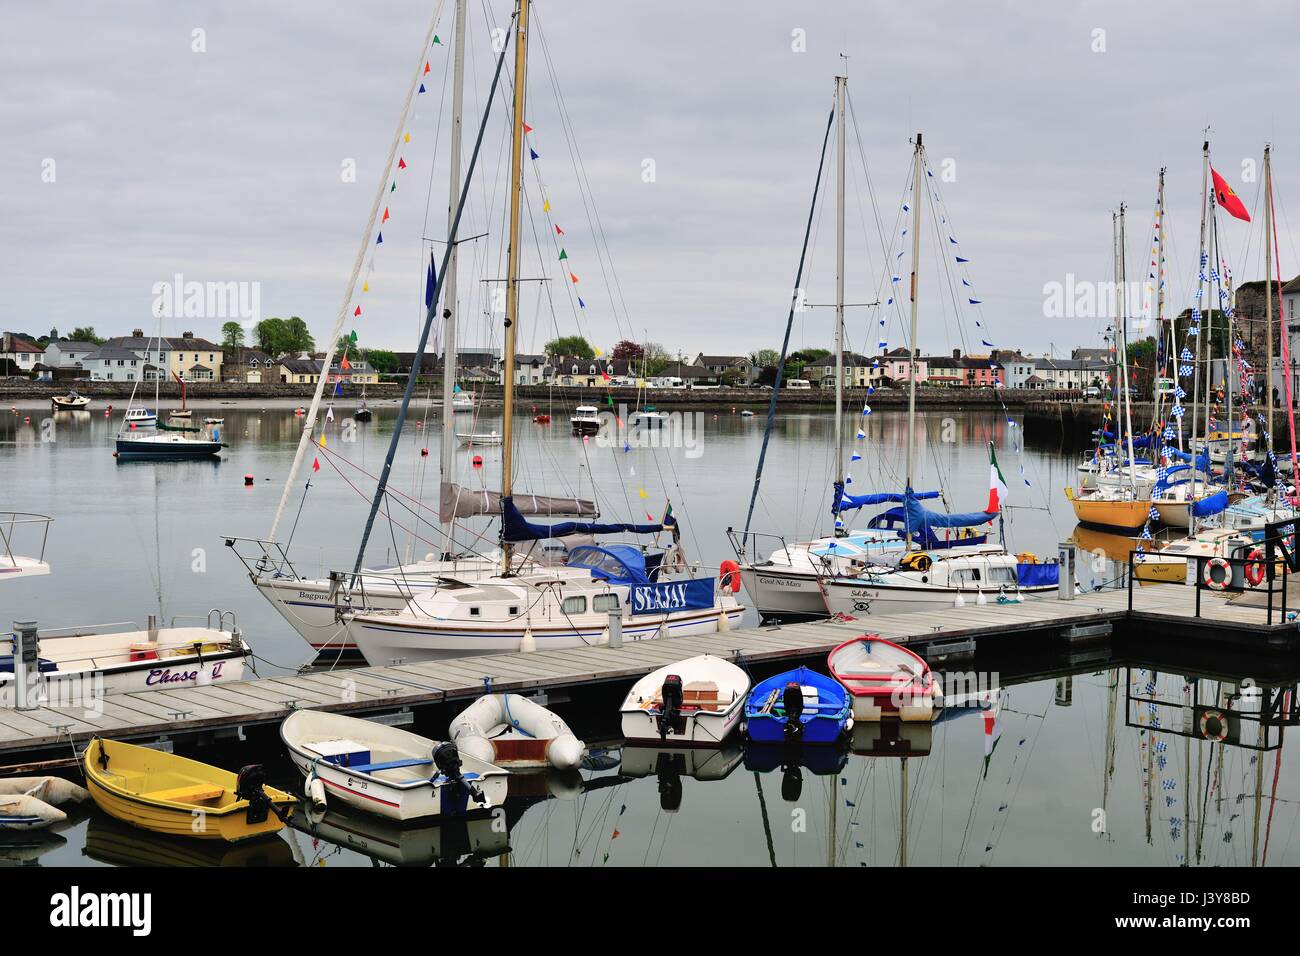 Small boats and sailboats in Dungarvan Harbor in the Irish coastal community of Dungarvan in County Waterford. Dungarvan Harbor is an inlet from St. G Stock Photo